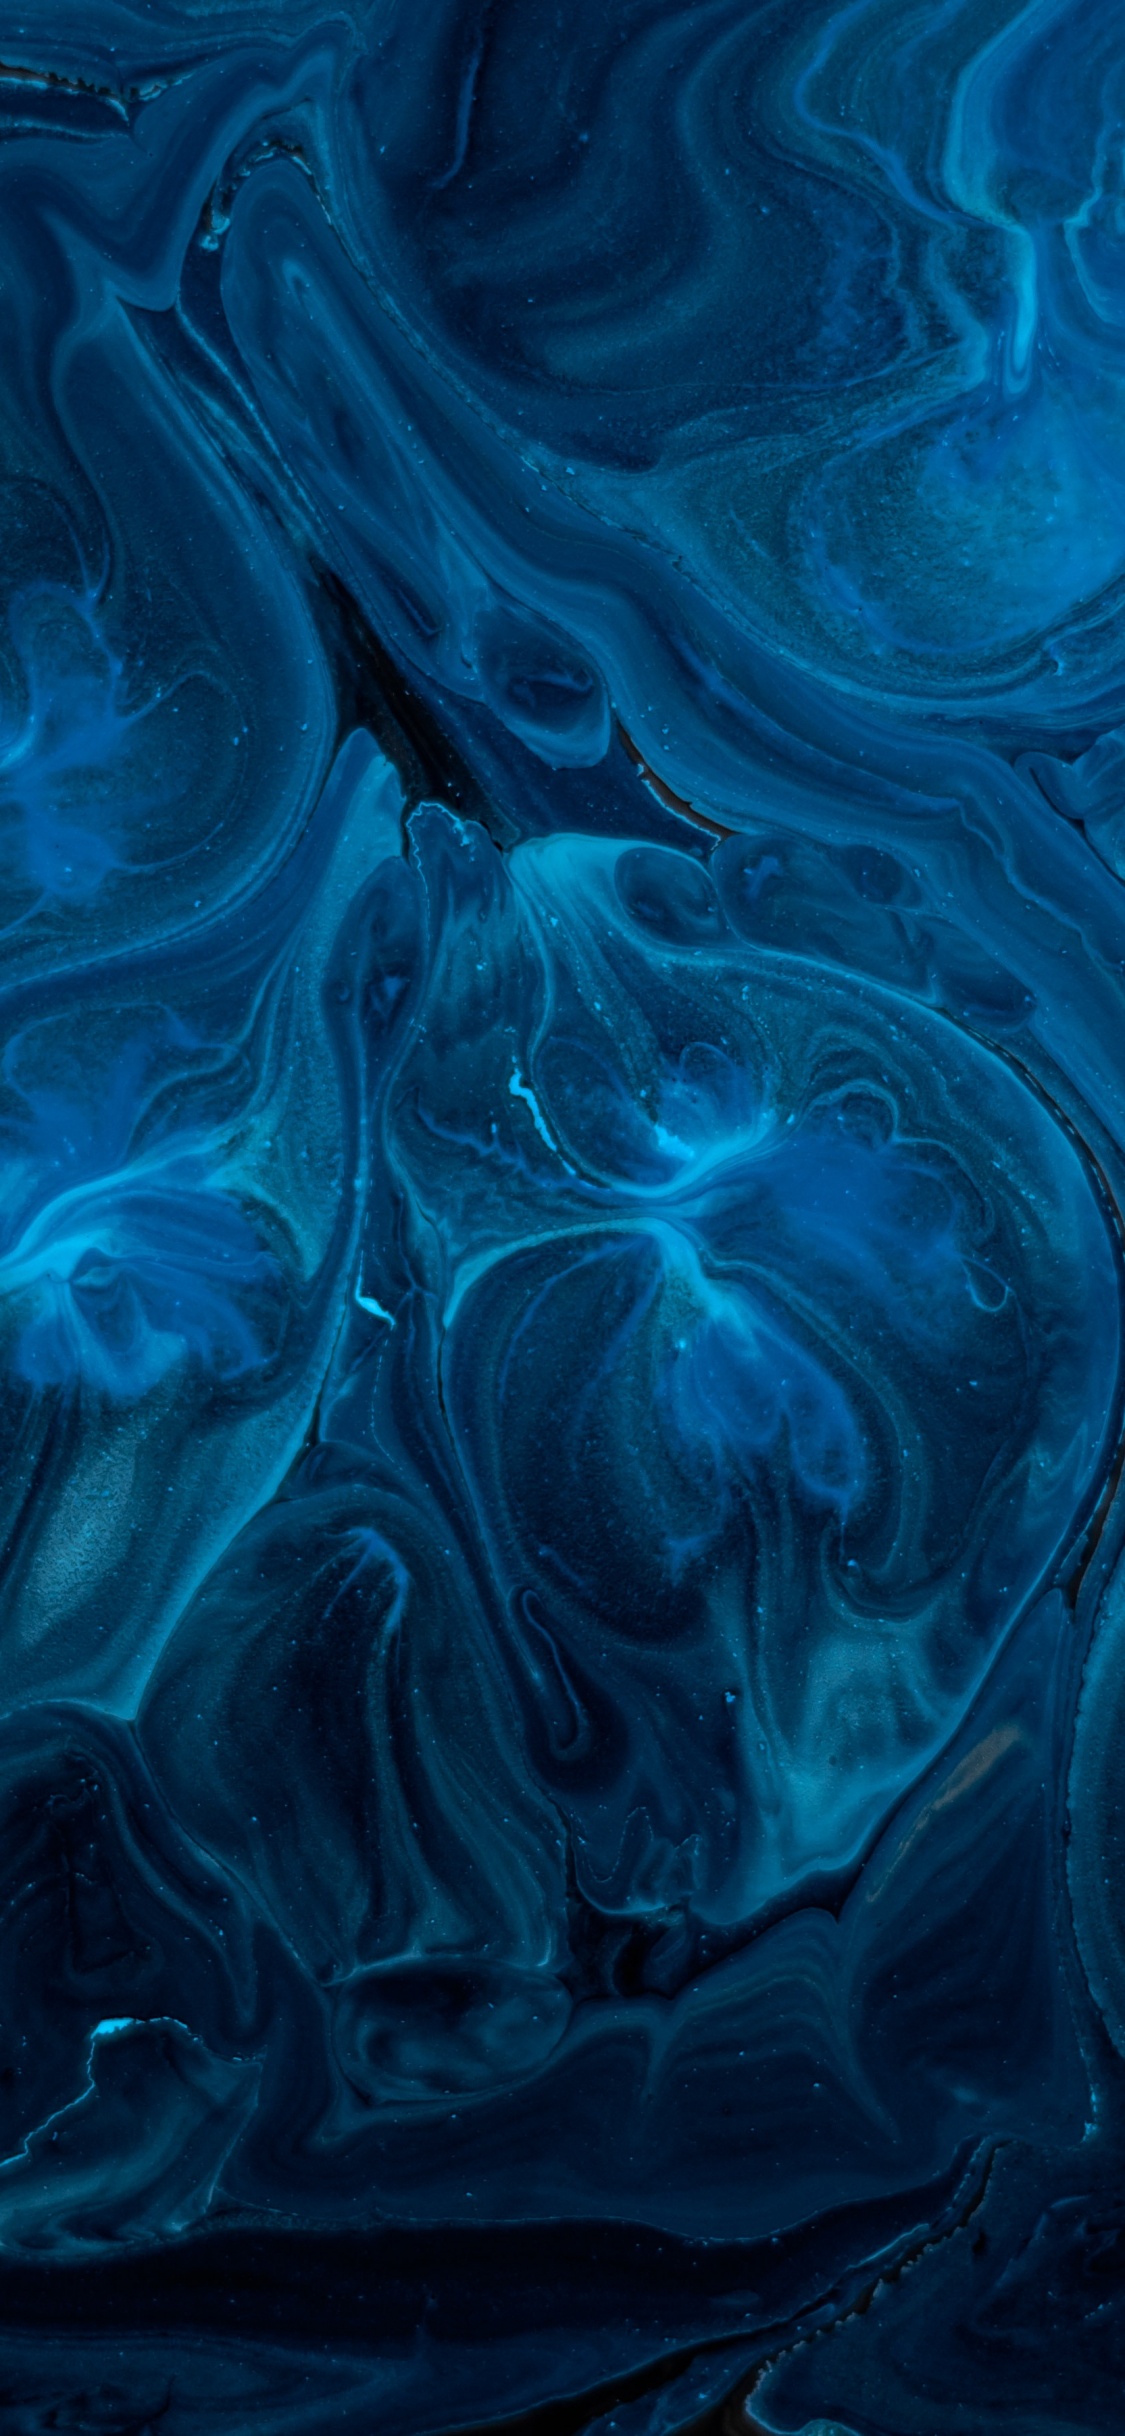 Blue and Black Abstract Painting. Wallpaper in 1125x2436 Resolution